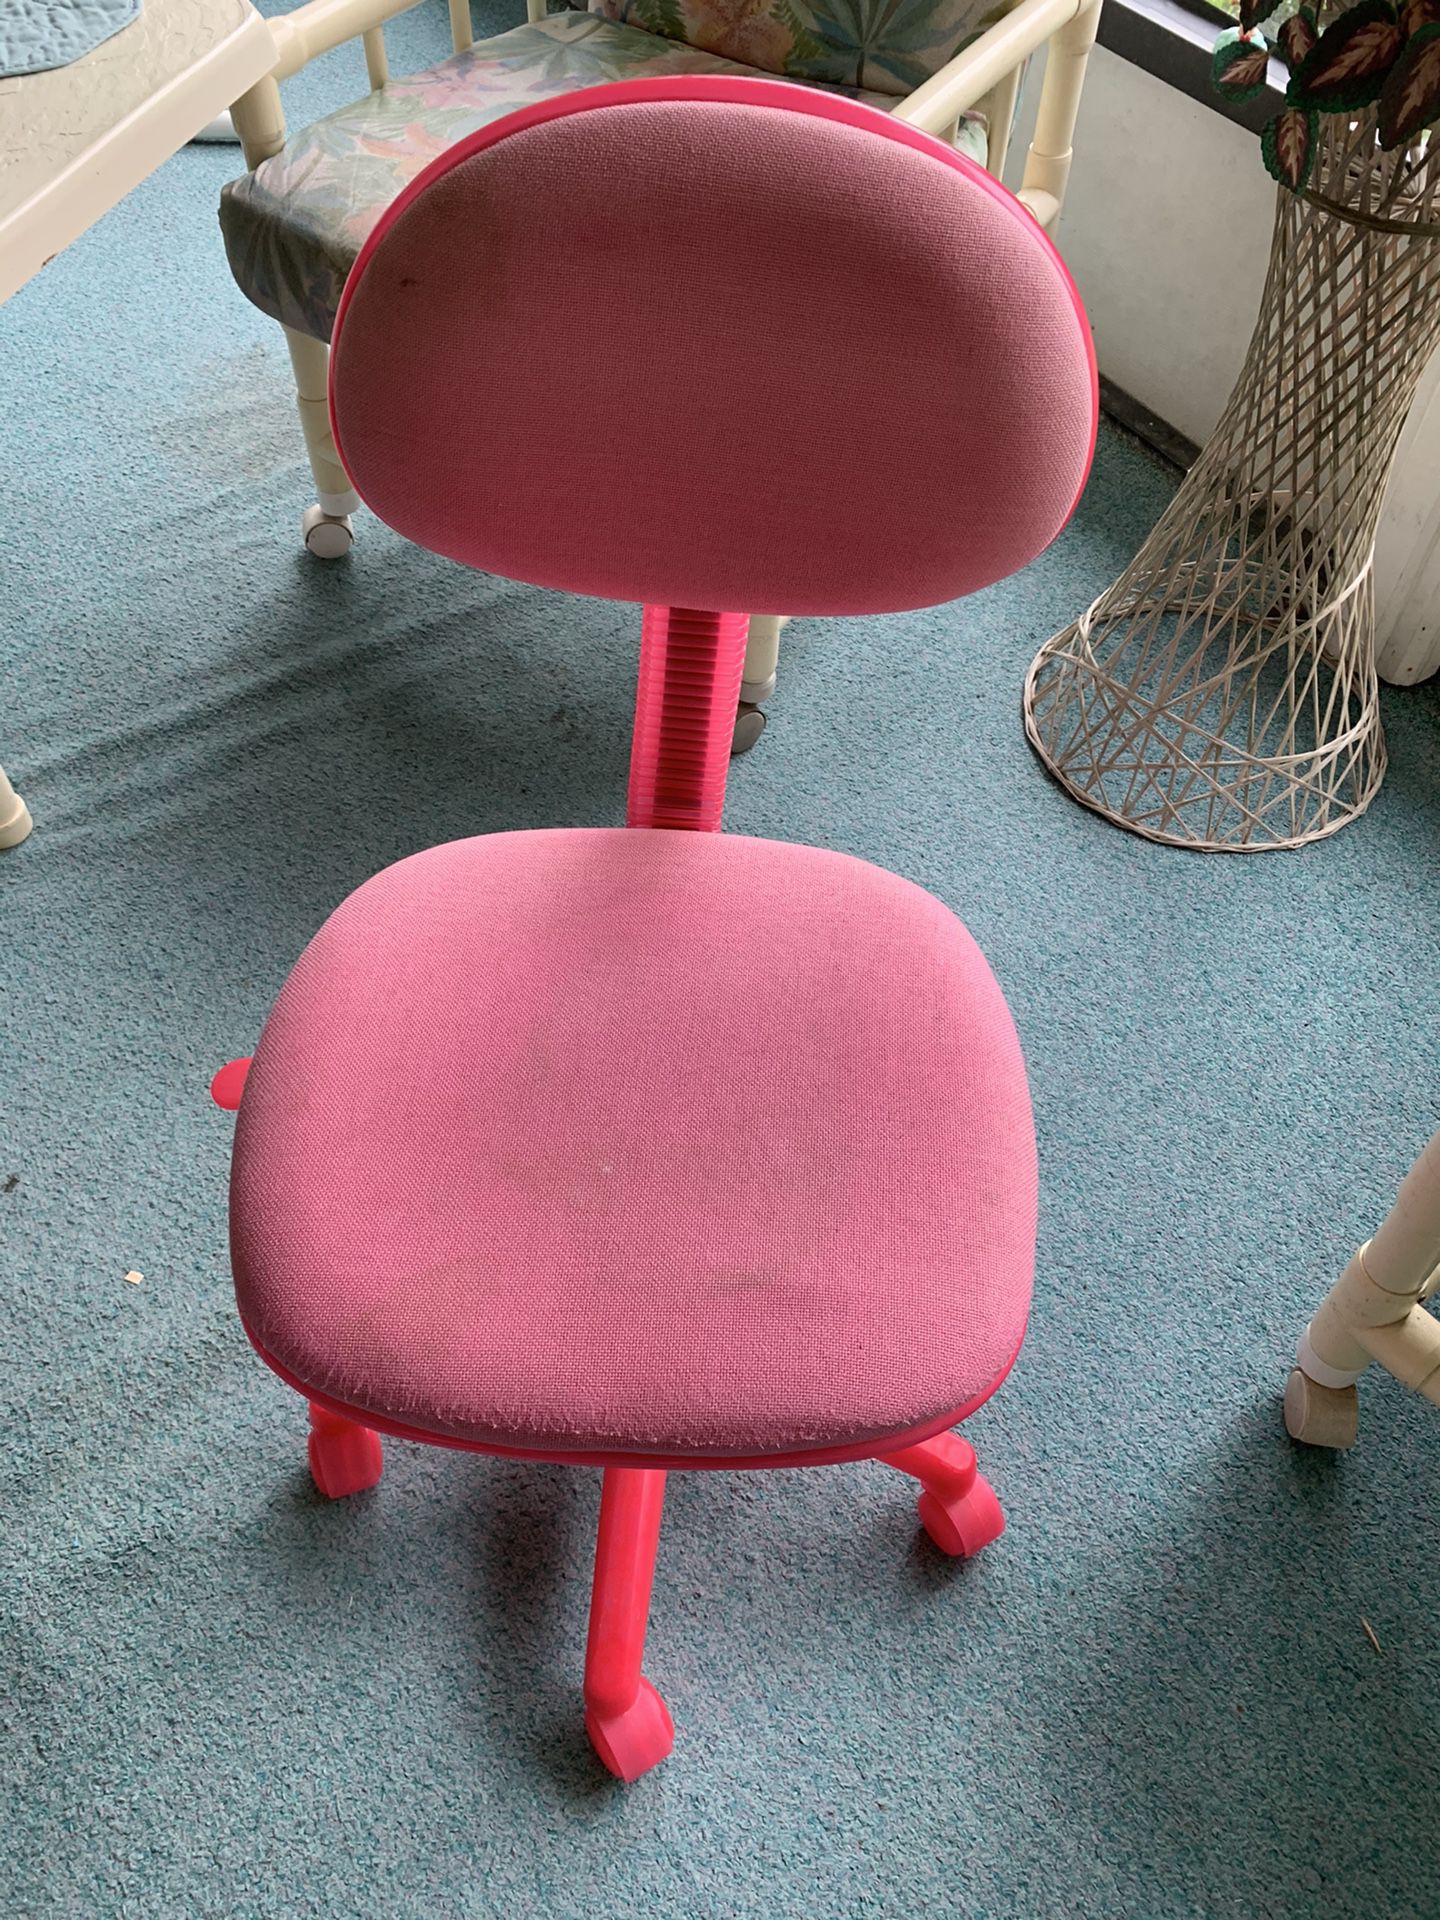 Hot Pink Small Desk Chair